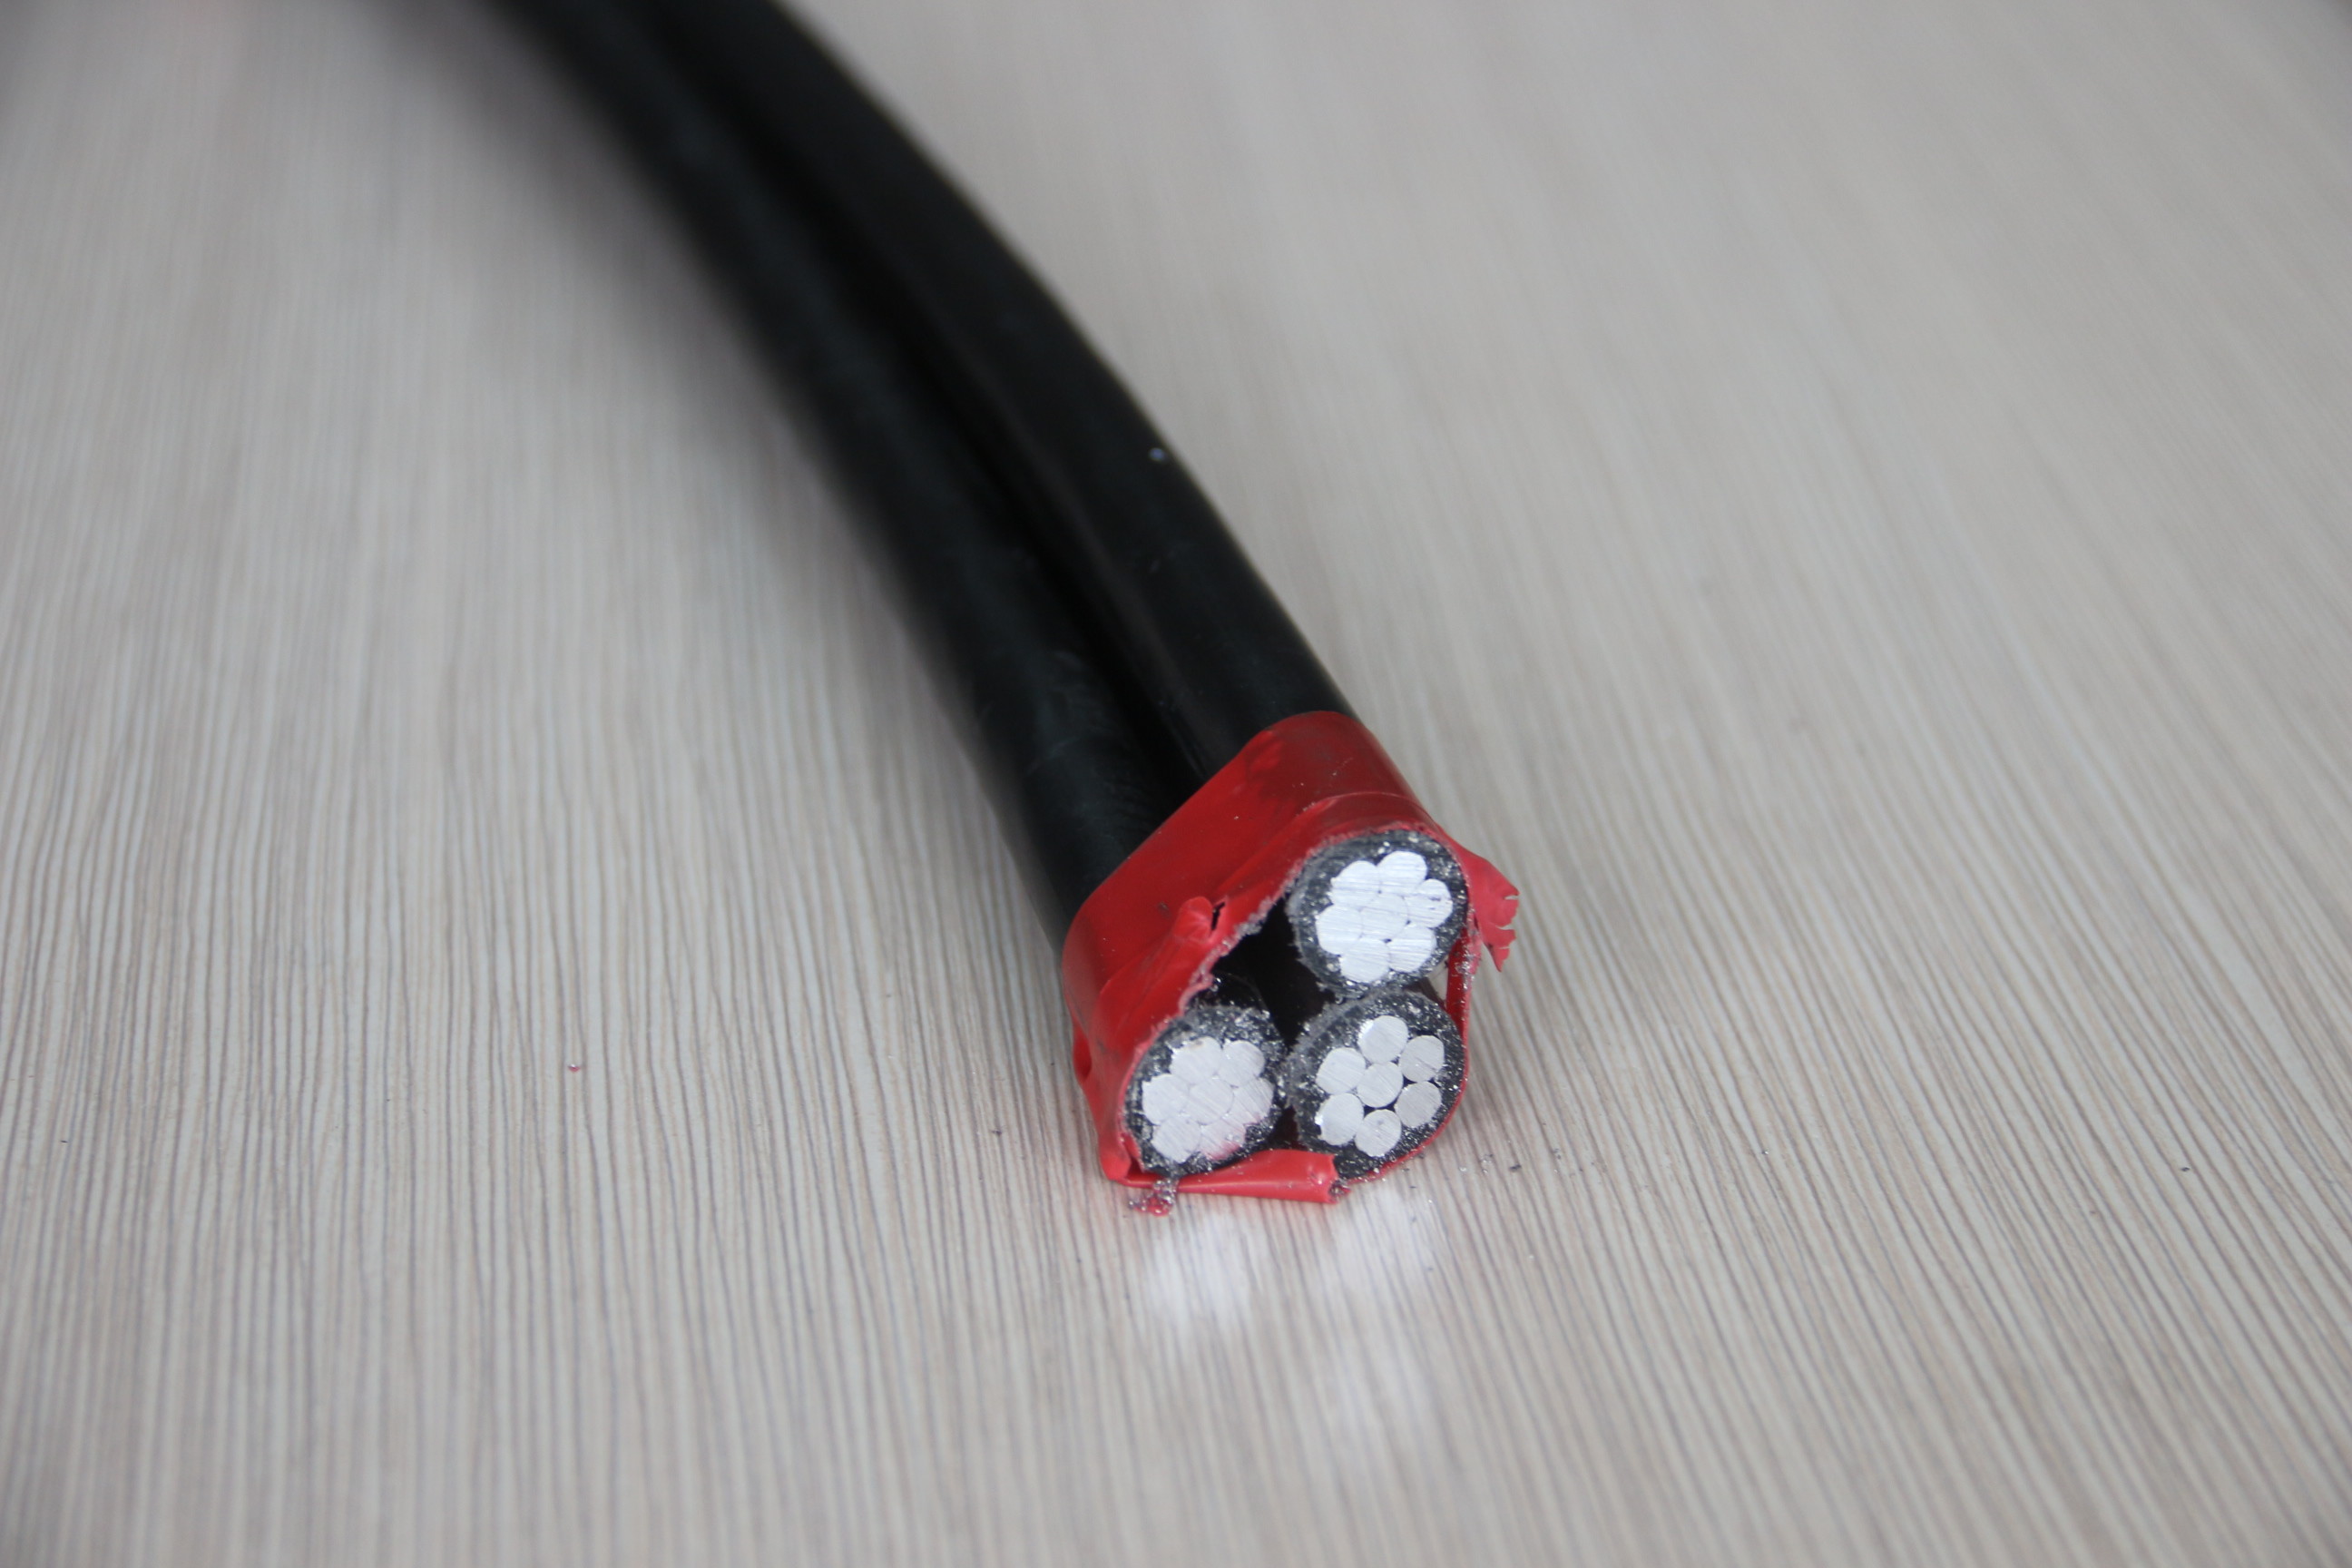  XLPE PVC Insulation Aluminum Conductor Overhead Cable Transmission Line Manufactures